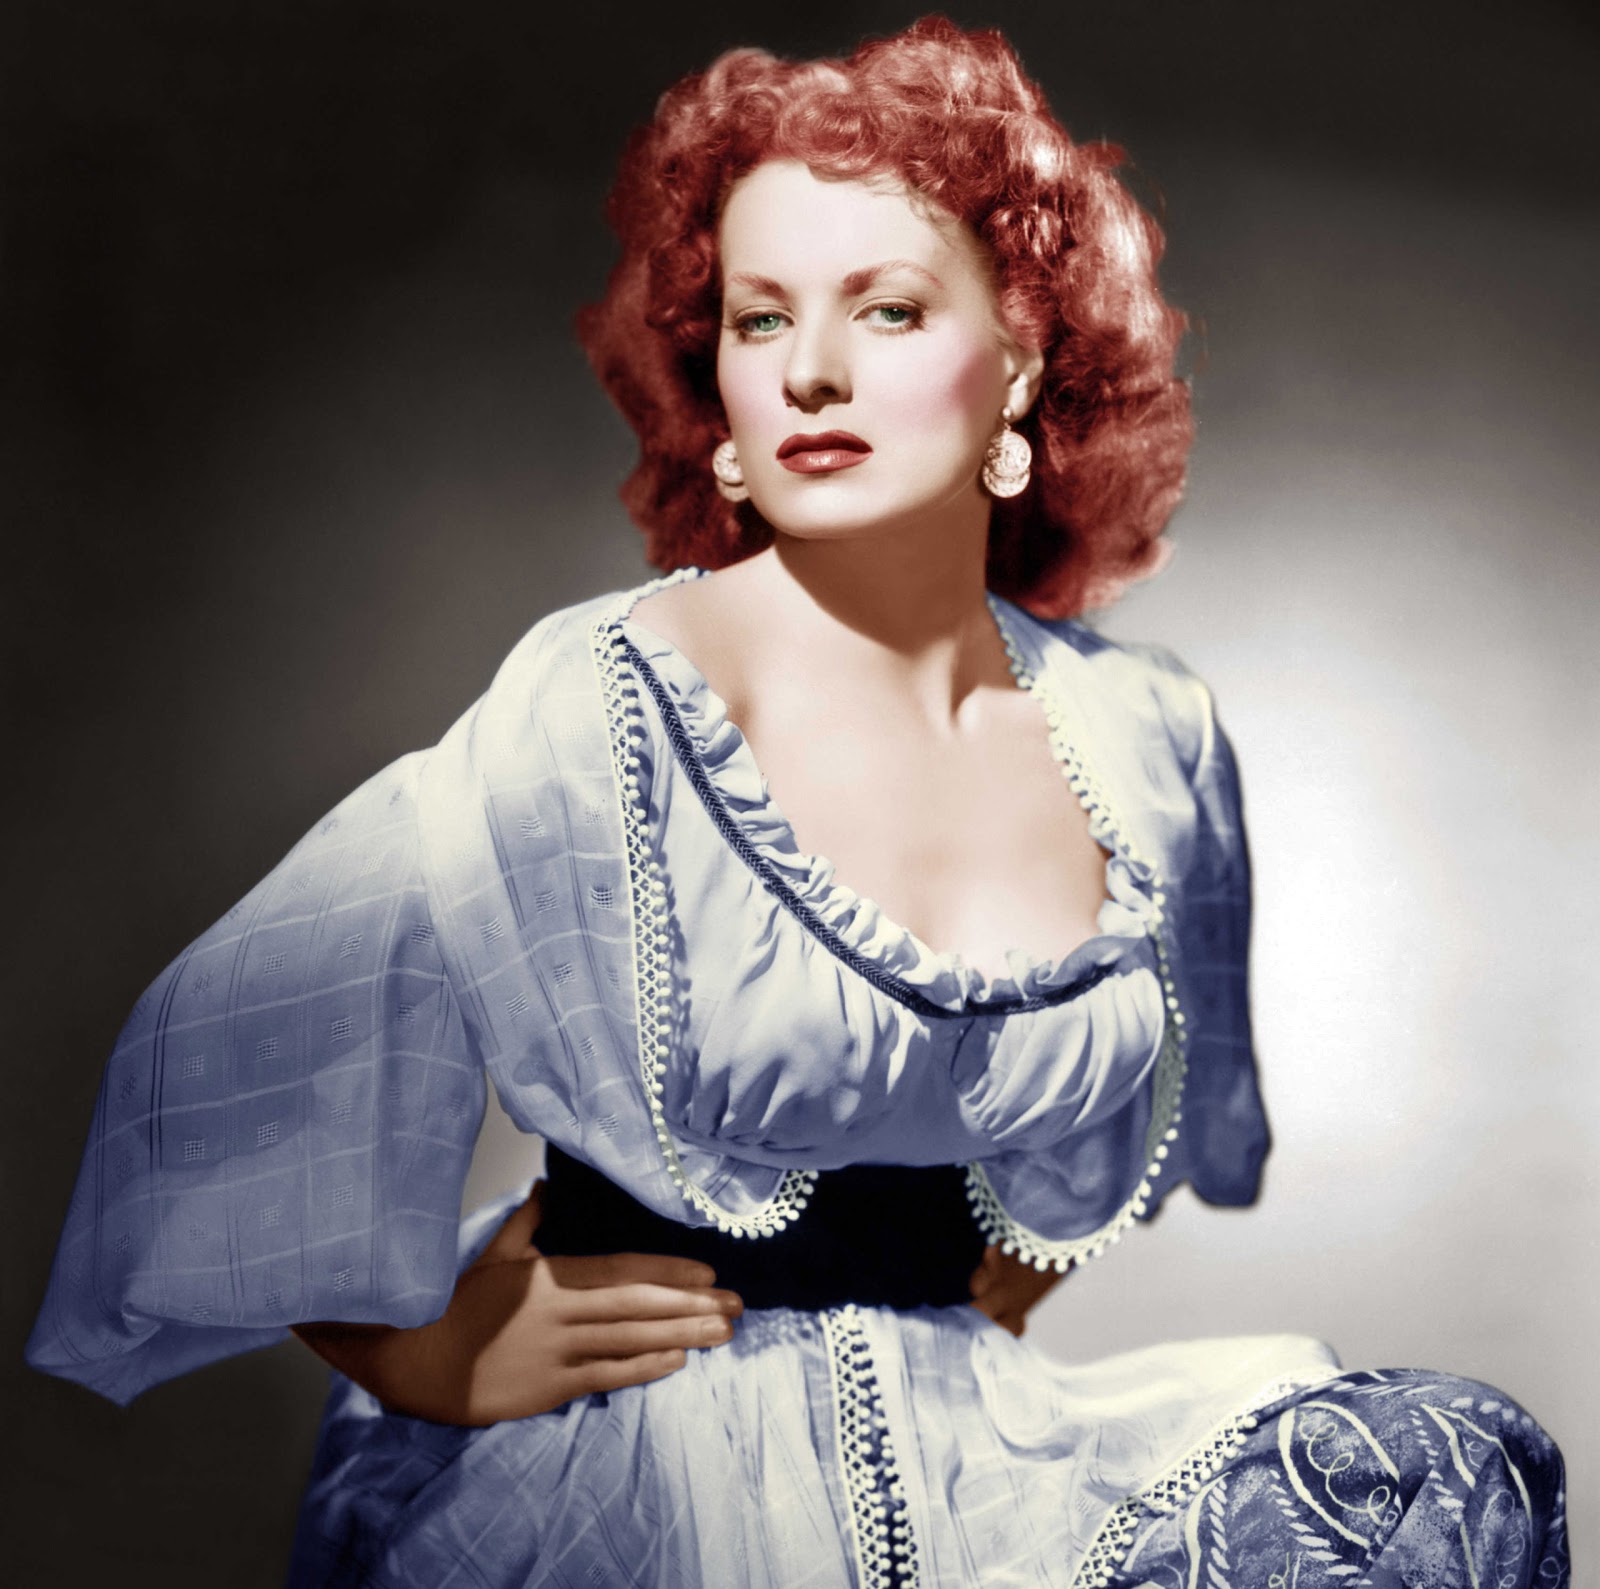 a-shroud-of-thoughts-the-late-great-maureen-o-hara-queen-of-technicolor